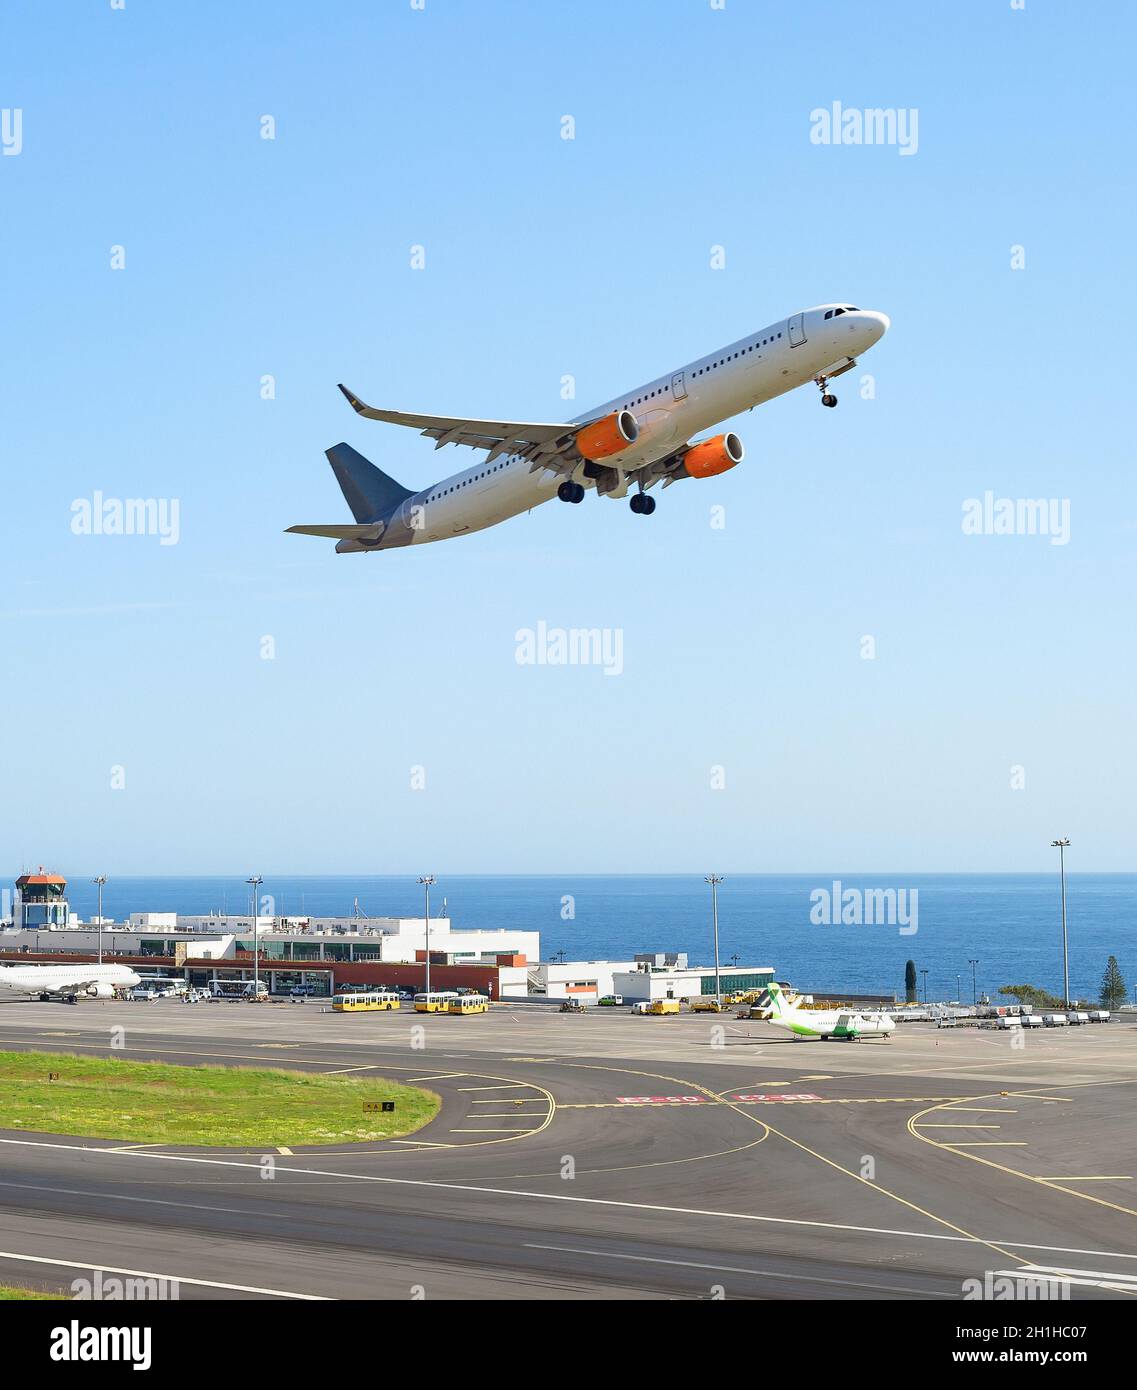 Airplaine taking off runway at Madeira international airport, terminal building and seascape in background, Portugal Stock Photo